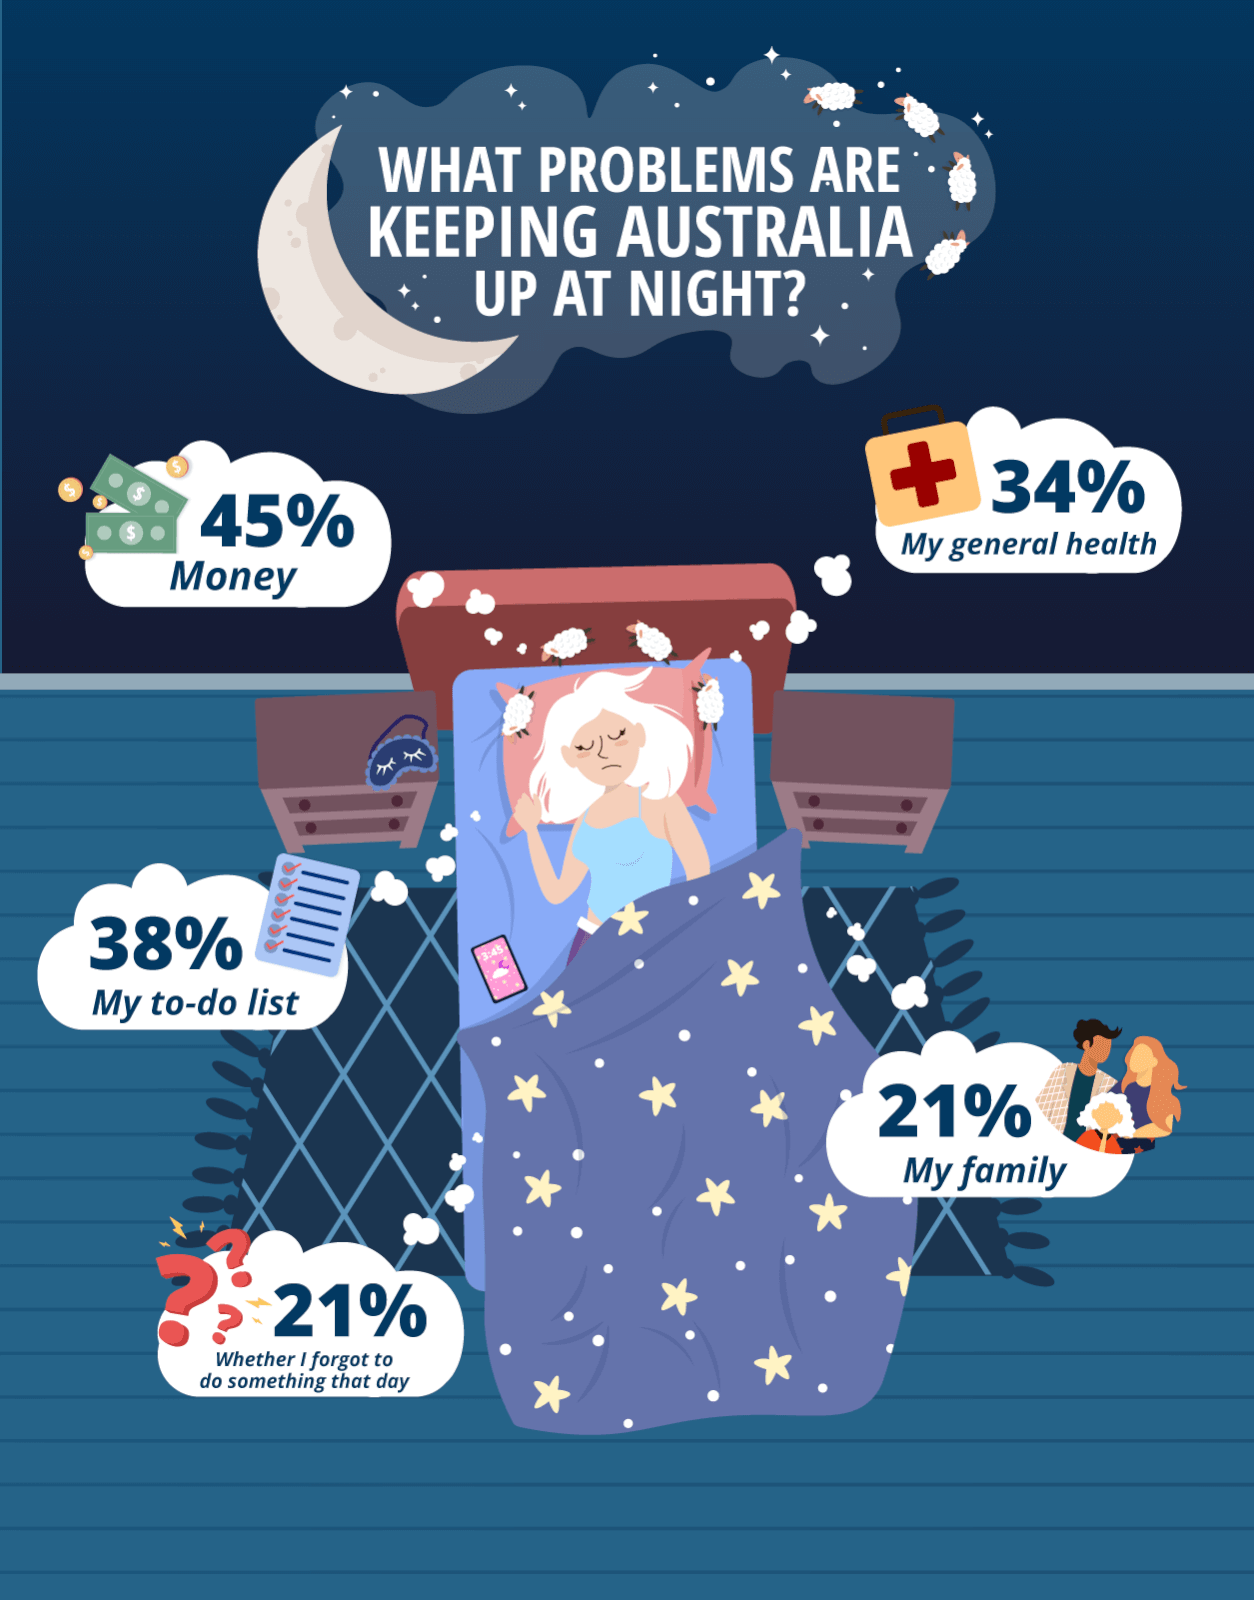 Image showing the most common problems that prevent Australians from getting a good night's sleep.